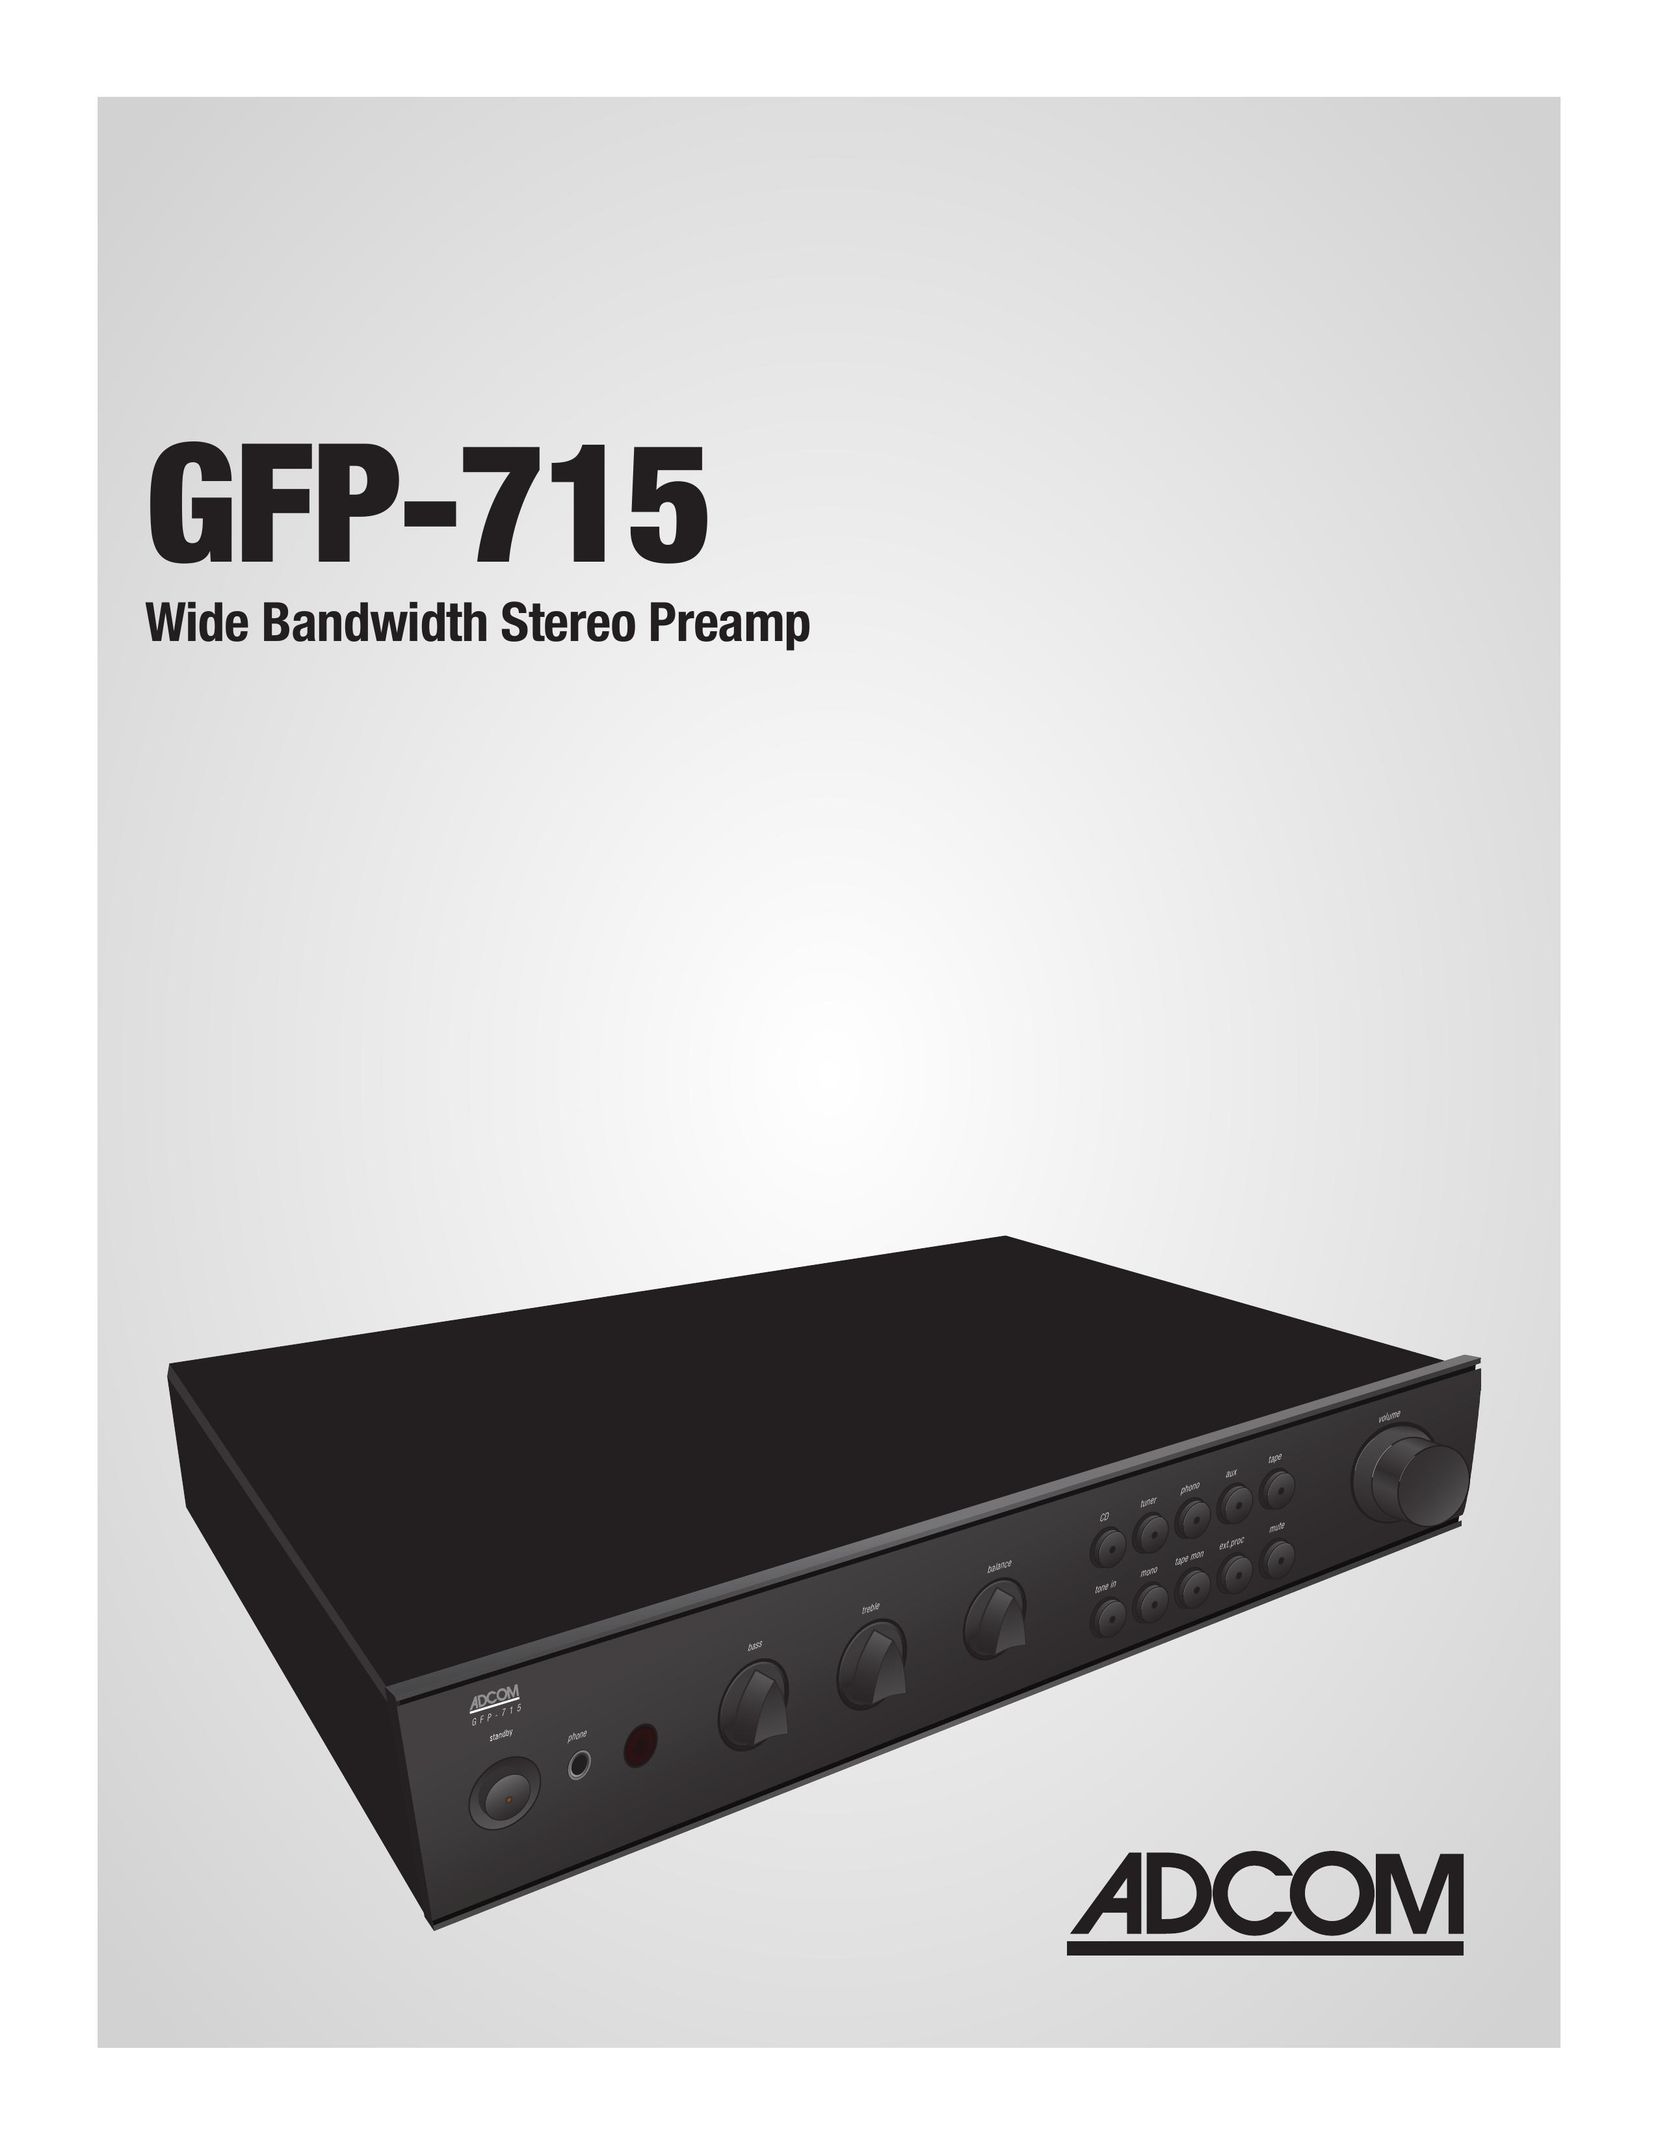 Adcom GFP-715 Stereo Amplifier User Manual